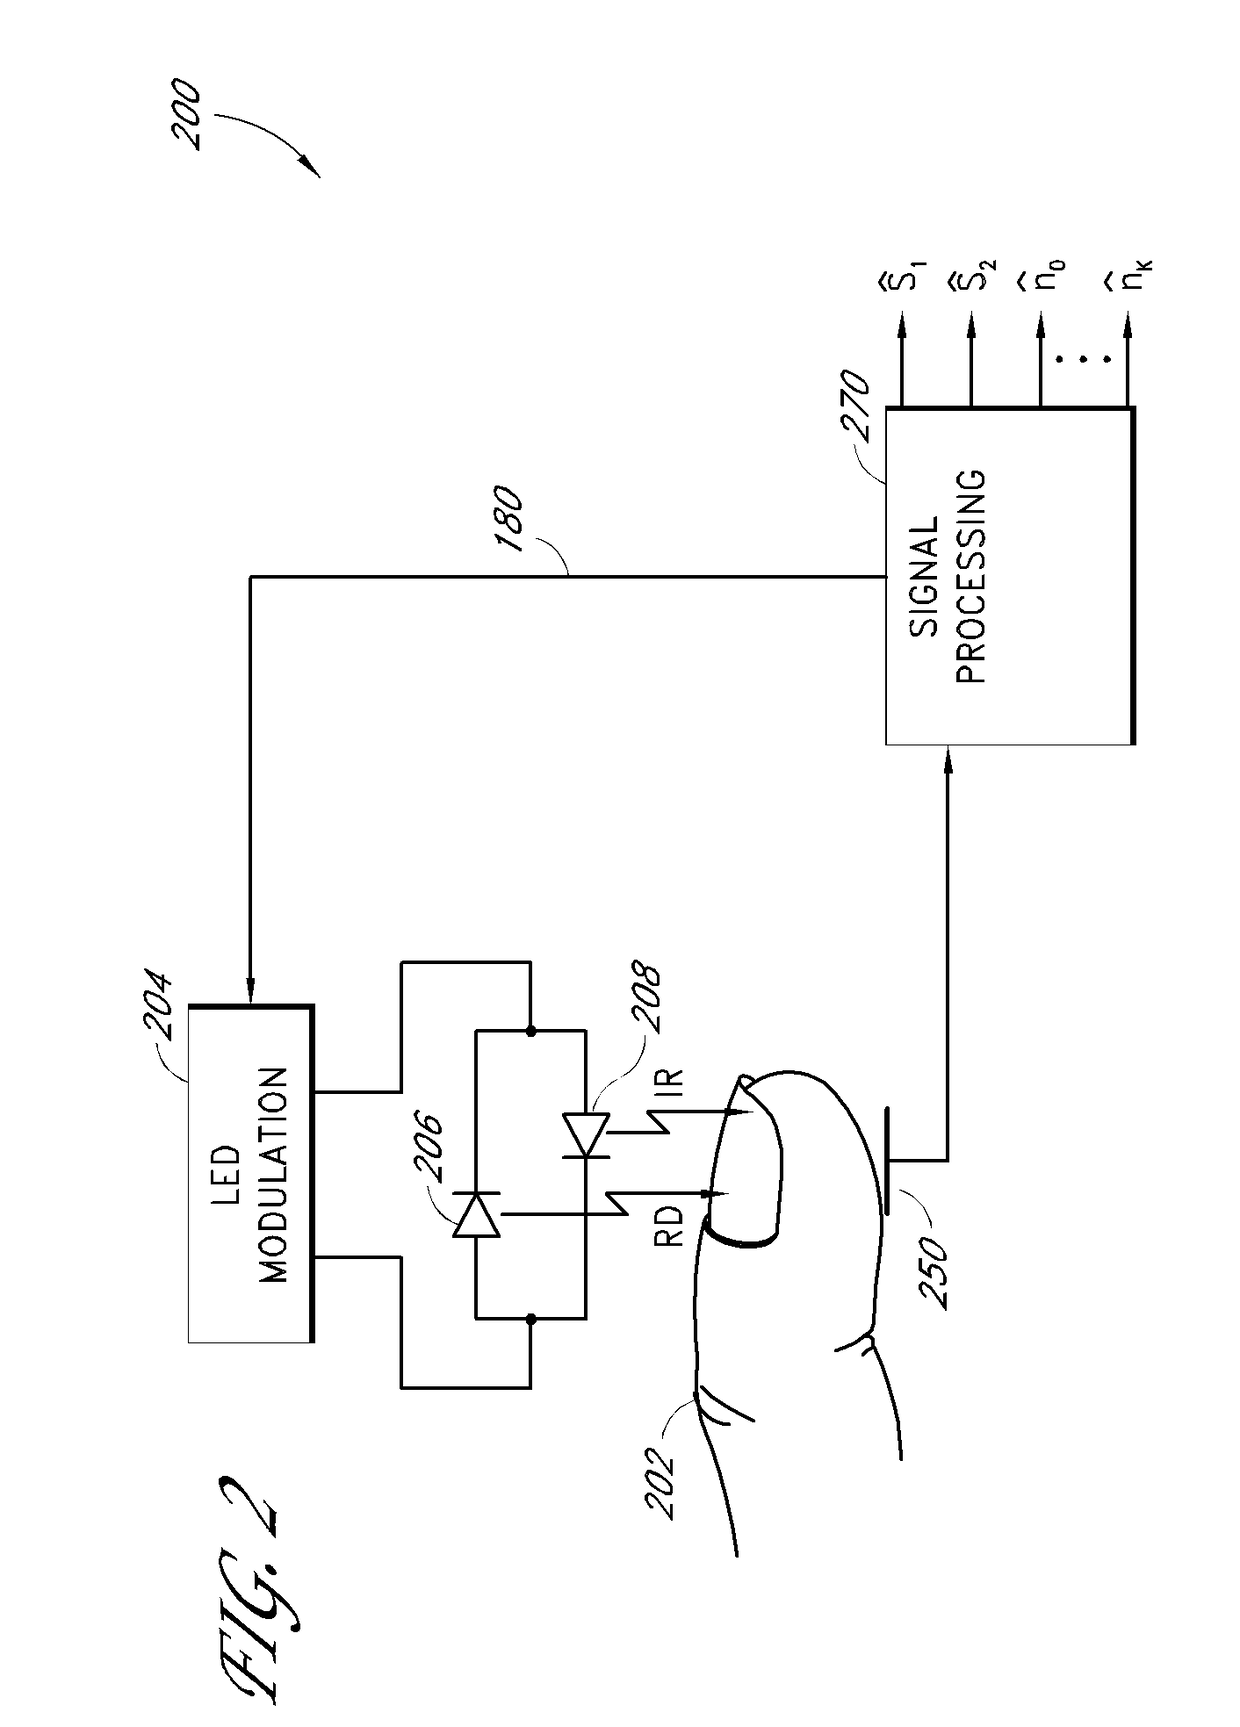 Method and apparatus for calibration to reduce coupling between signals in a measurement system